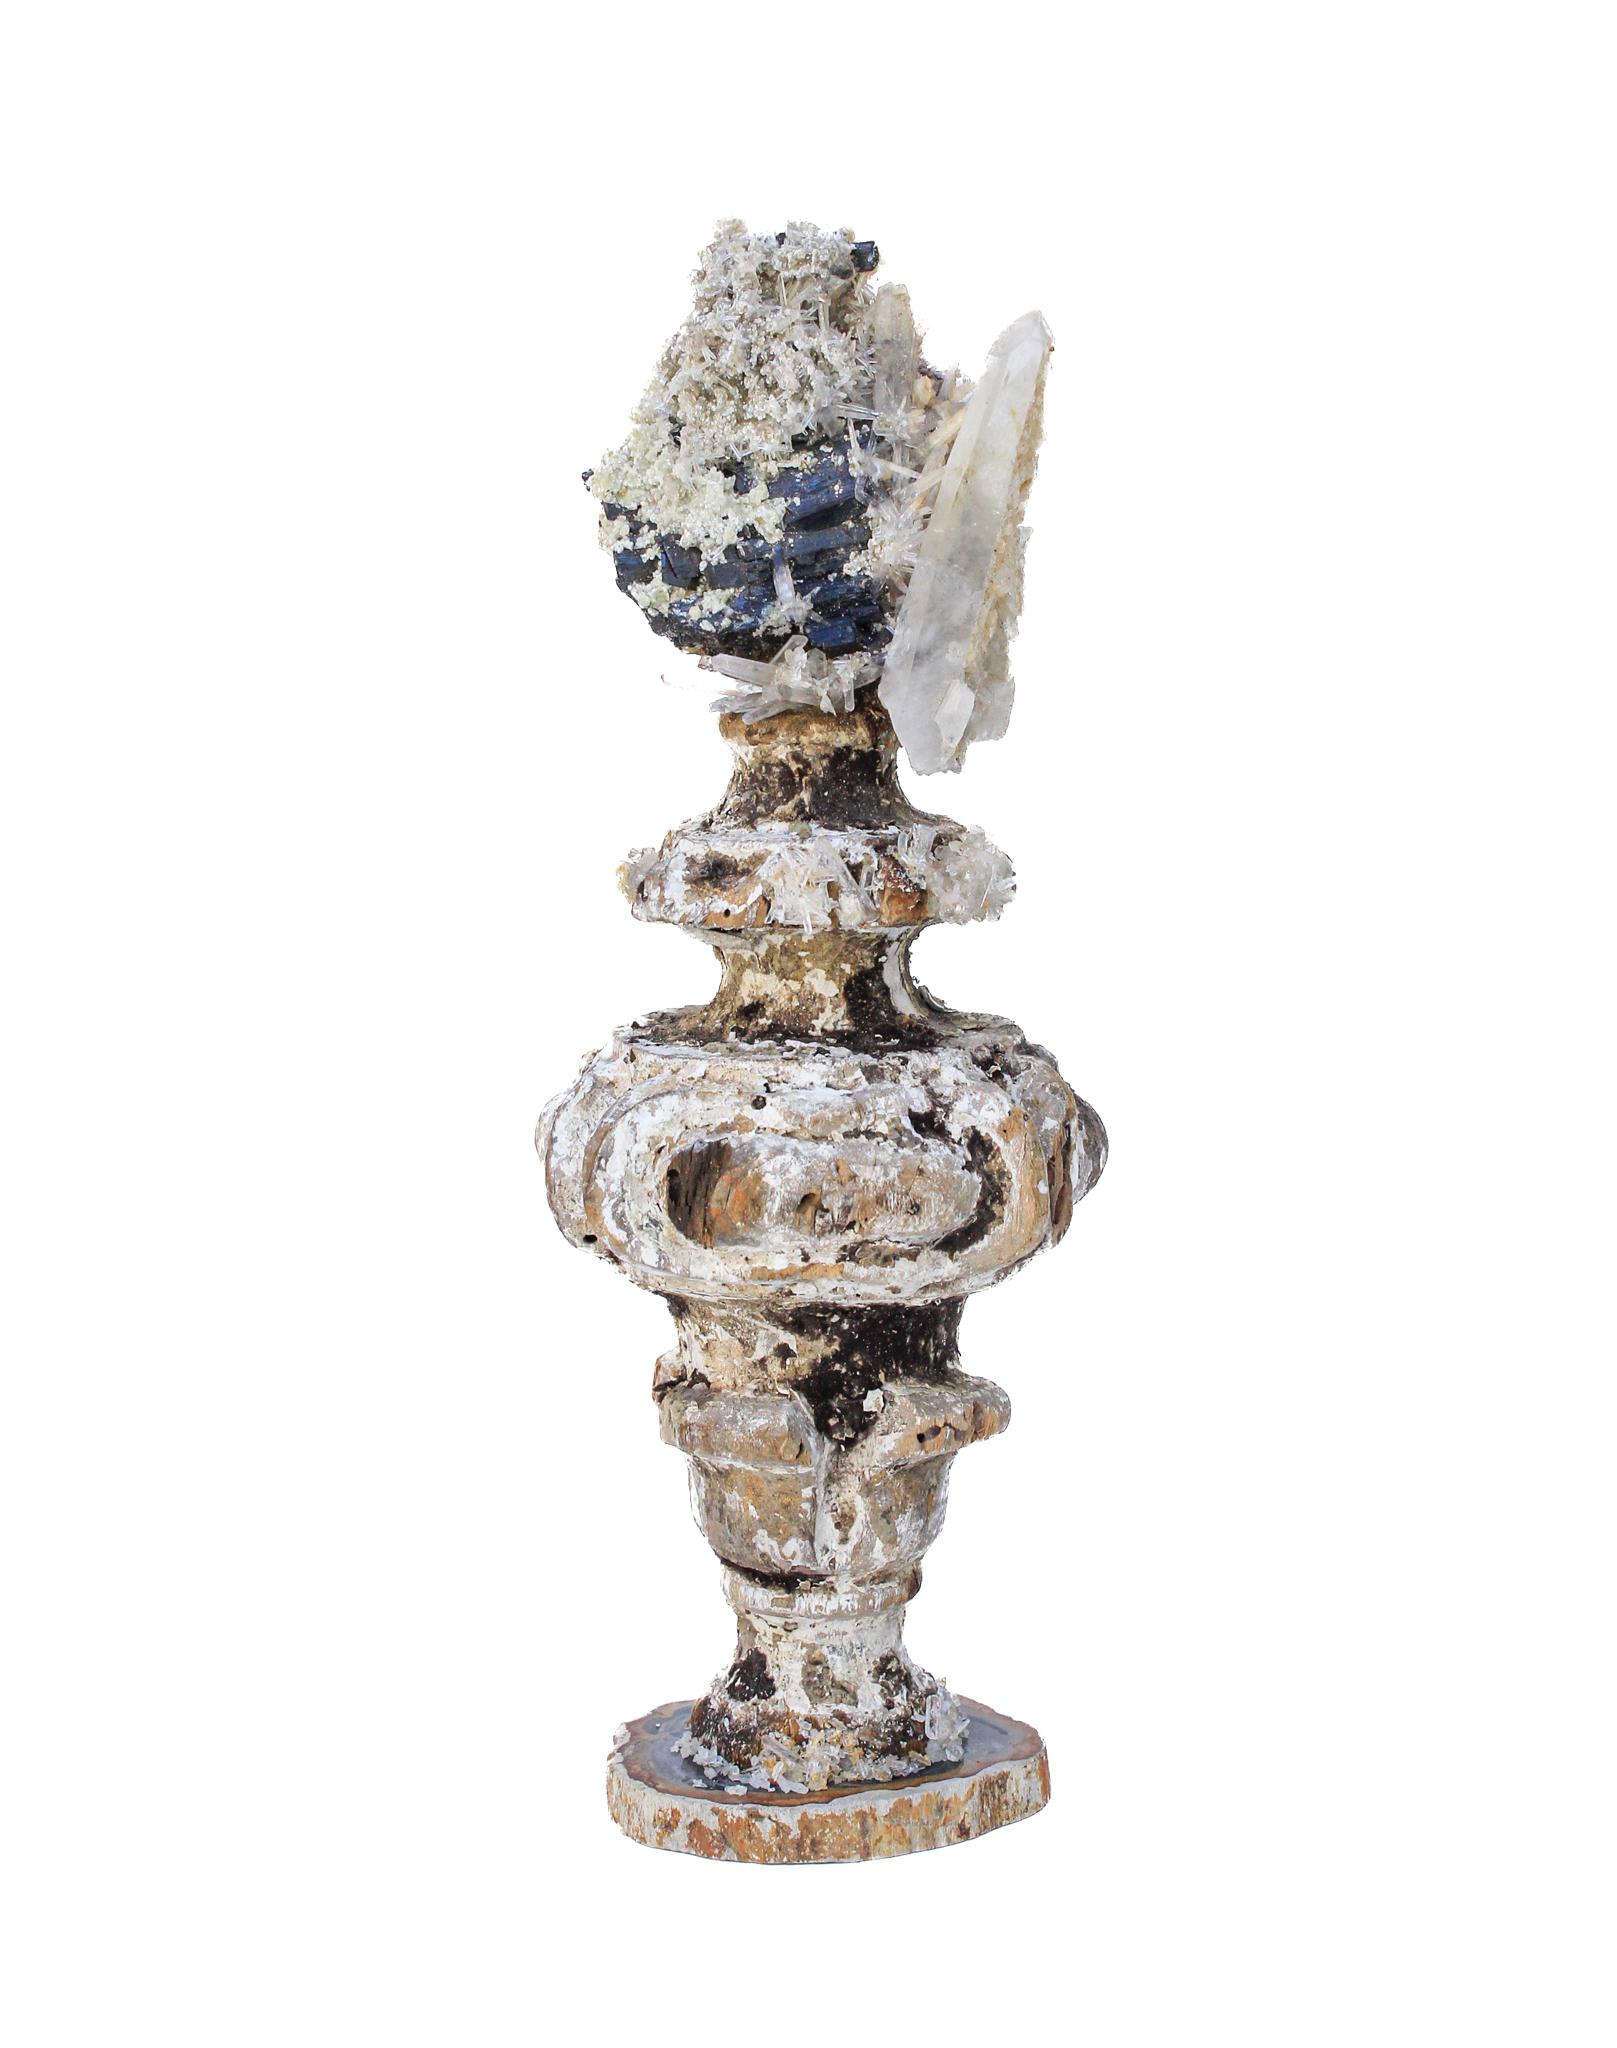 17th century Italian vase with black tourmaline and crystals on a petrified wood base

This fragment is from a church in Florence. It was found and saved from the historic flooding of the Arno River in 1966.

The piece has been naturally